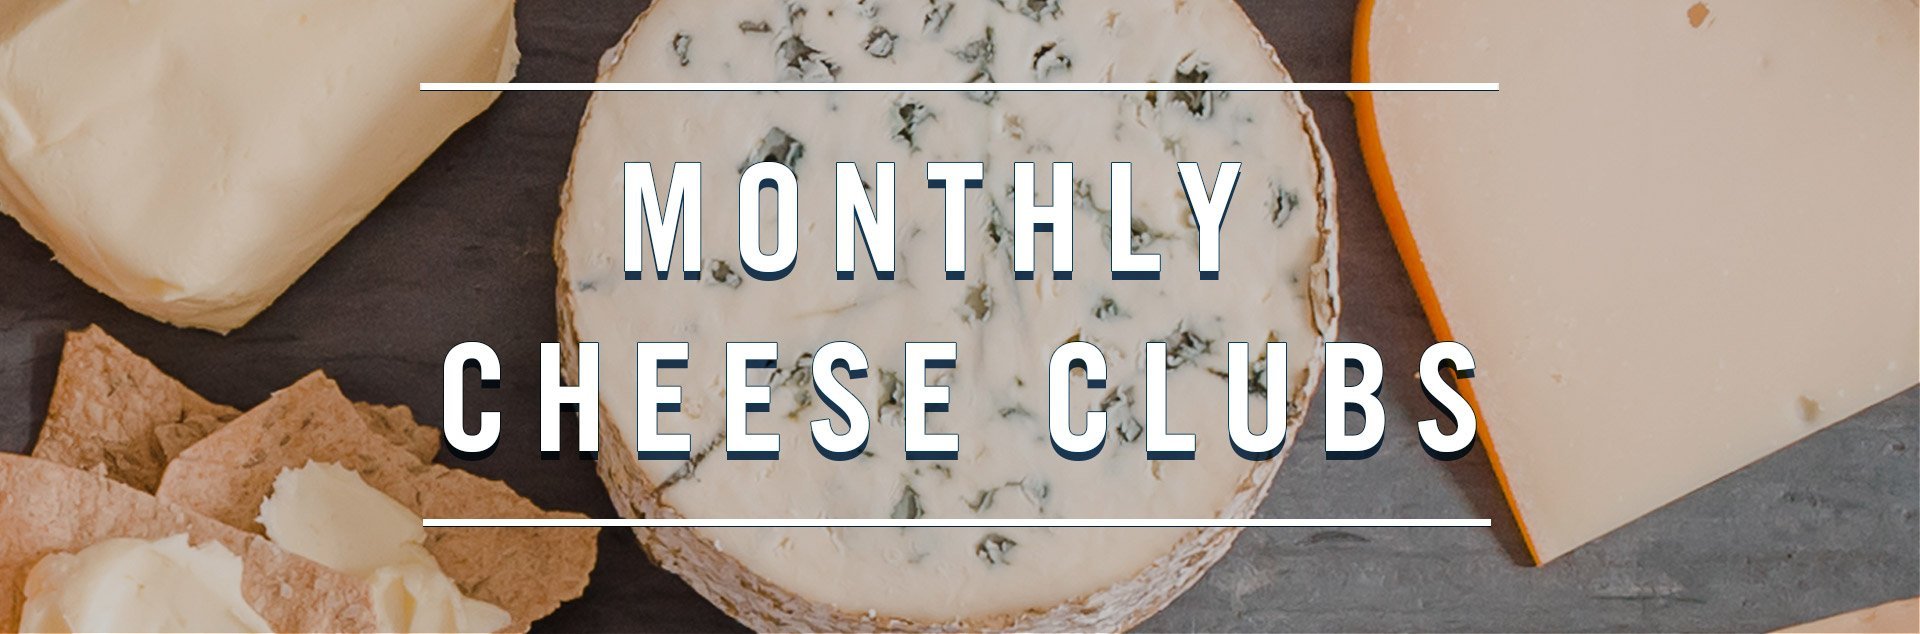 Monthly Cheese Clubs from Saxelby Cheesemogers